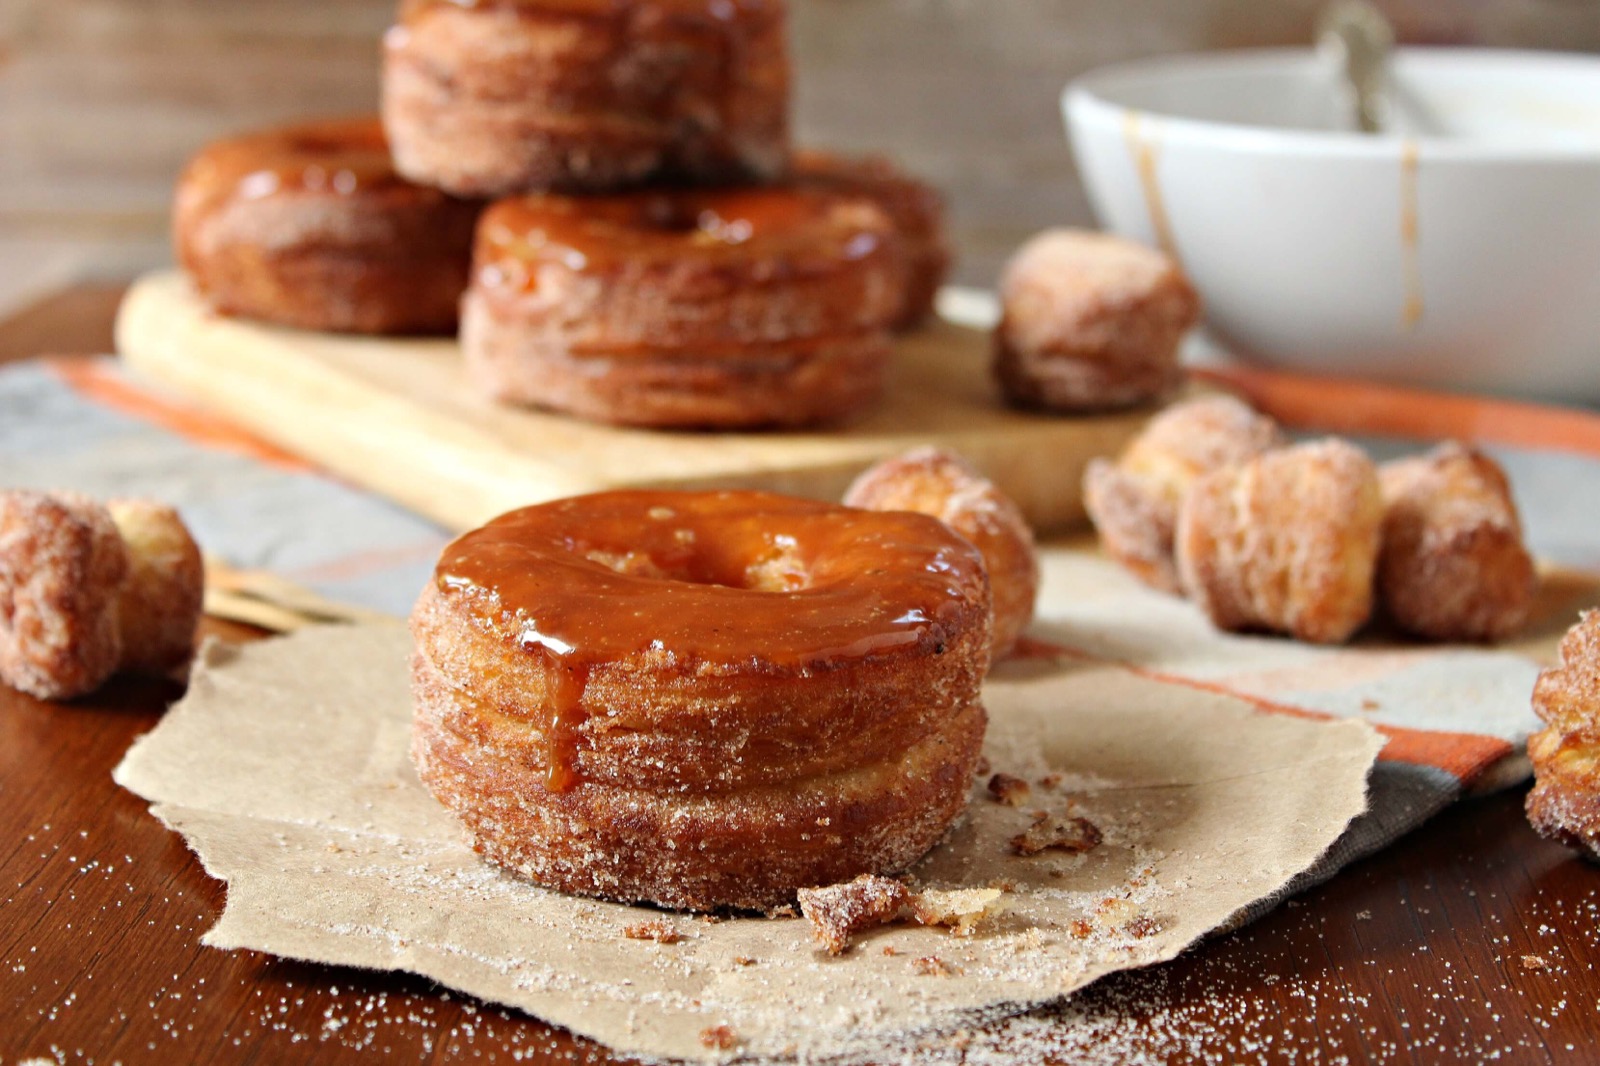 🍴 If You’ve Tried 18/27 of These Foods, You’re a Sophisticated Eater Cronuts